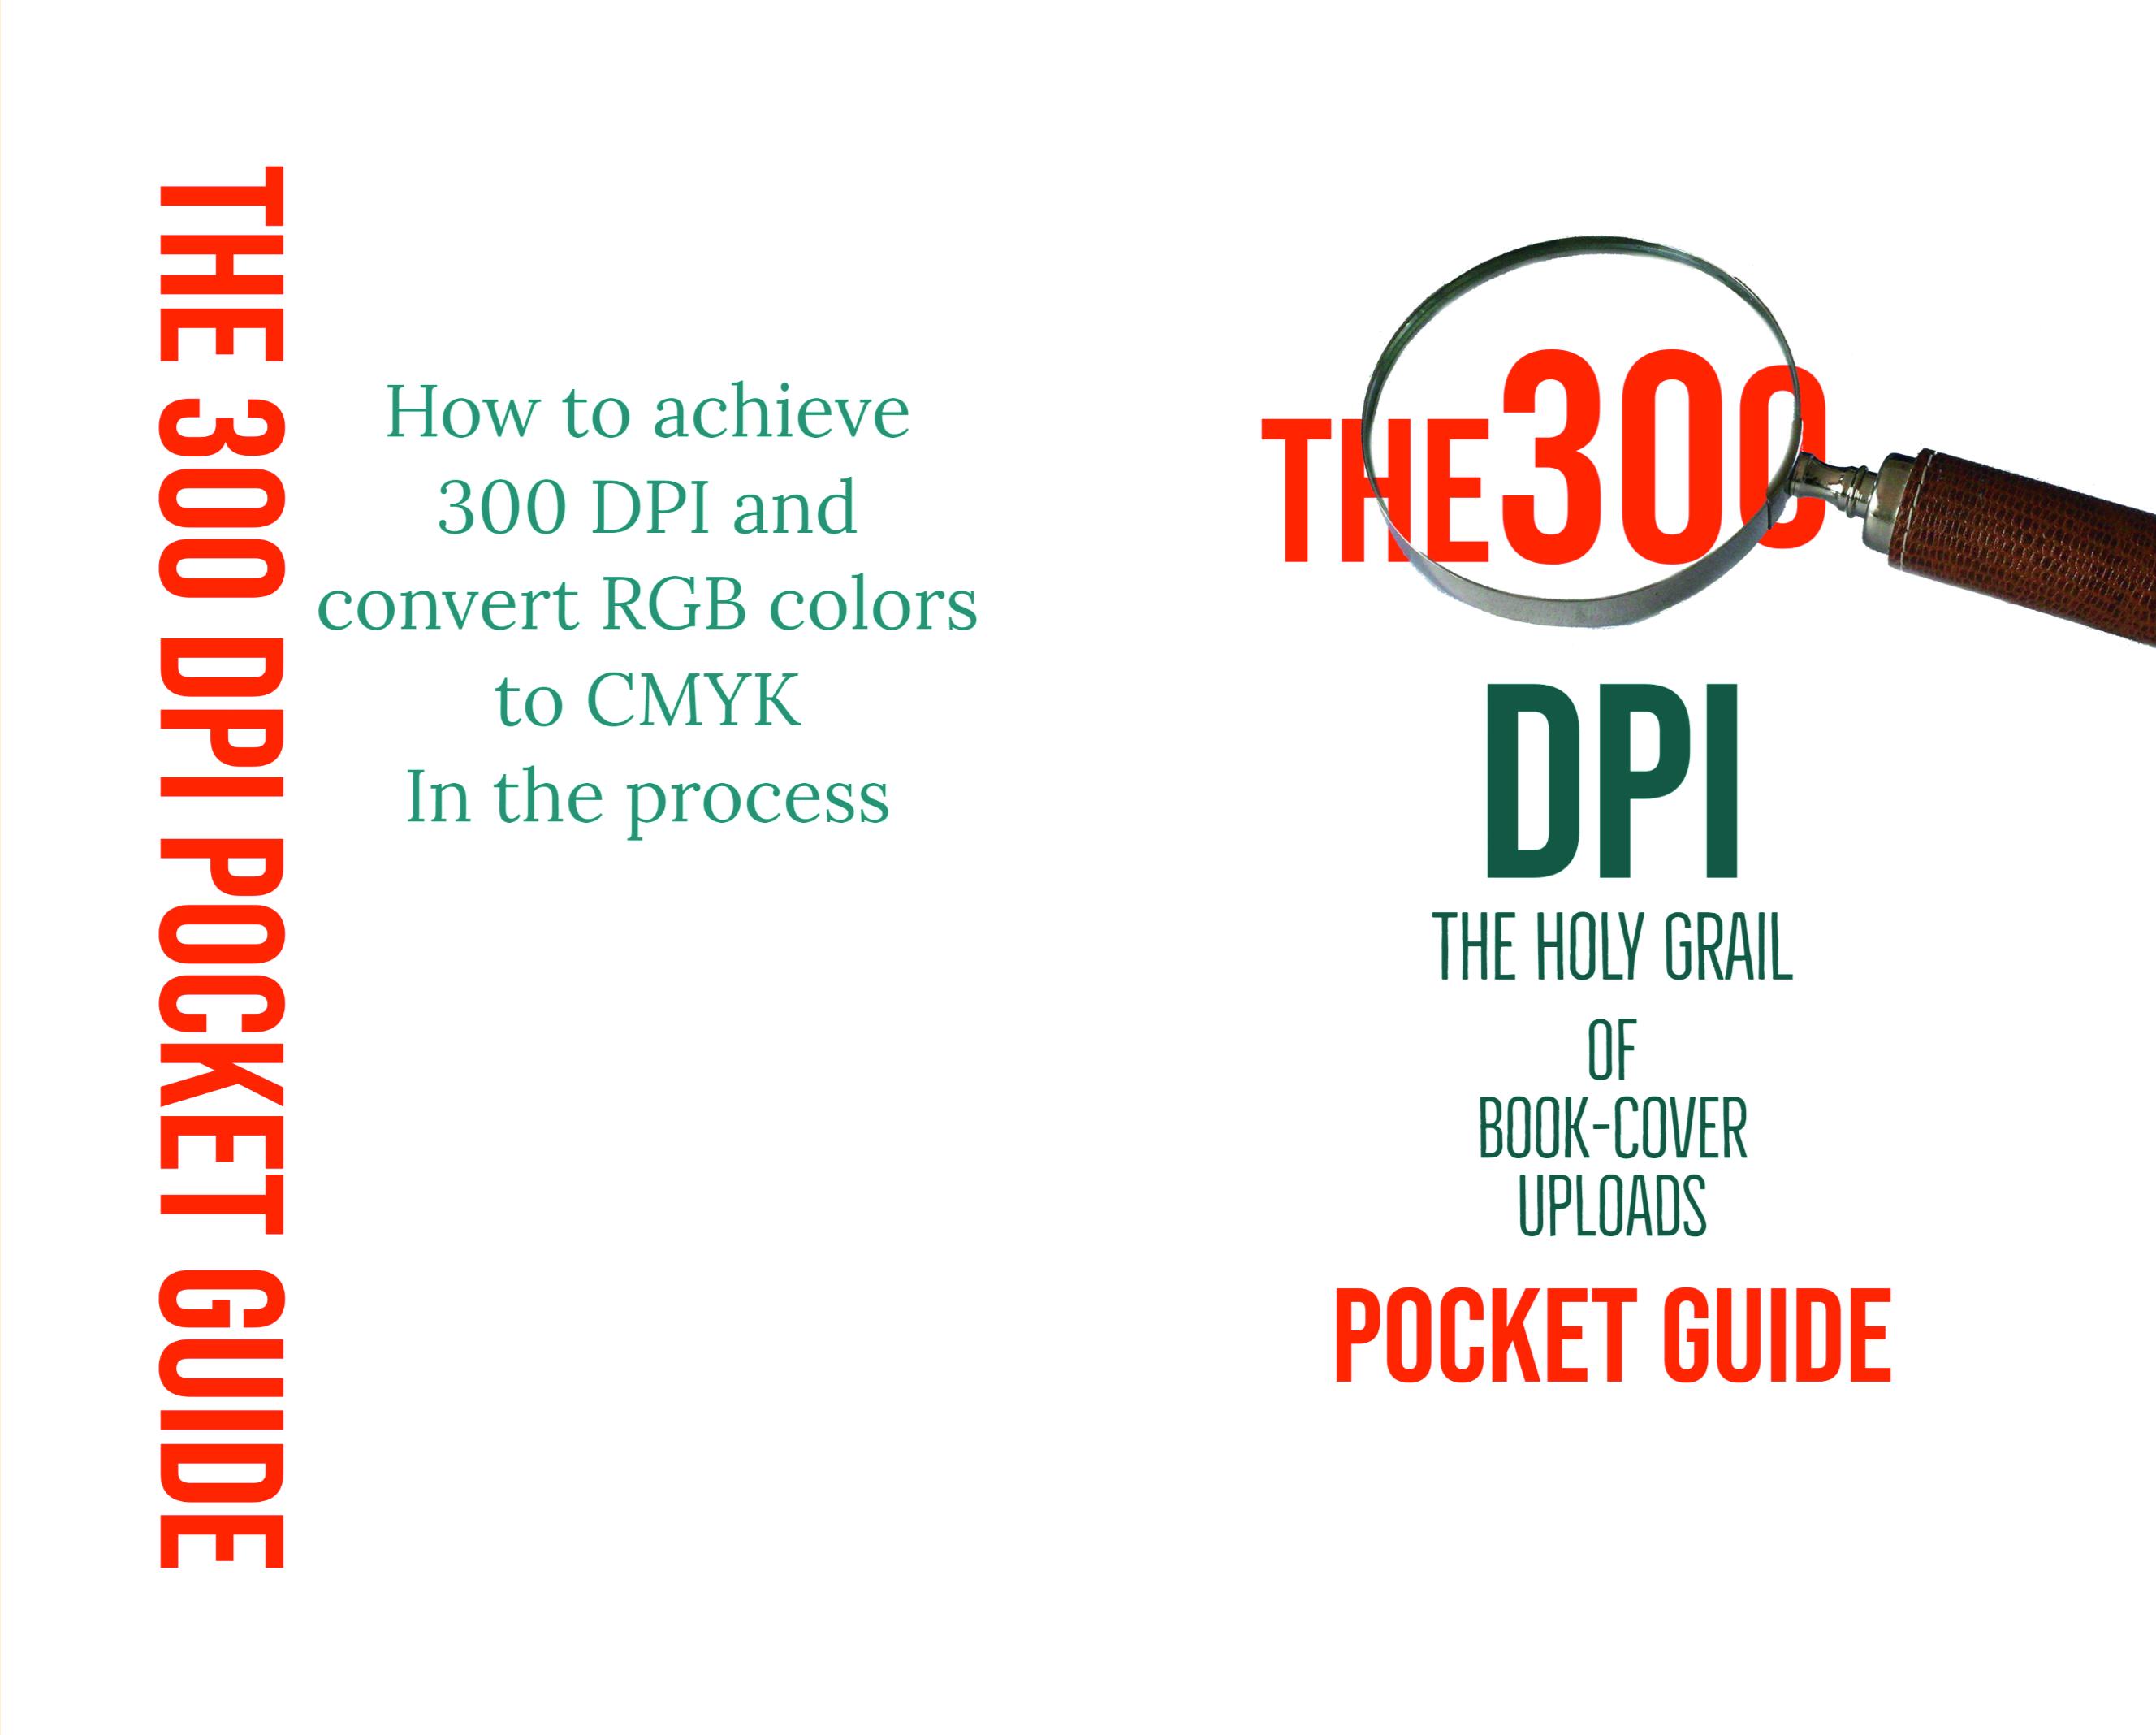 The 300 DPI Pocket Guide cover image